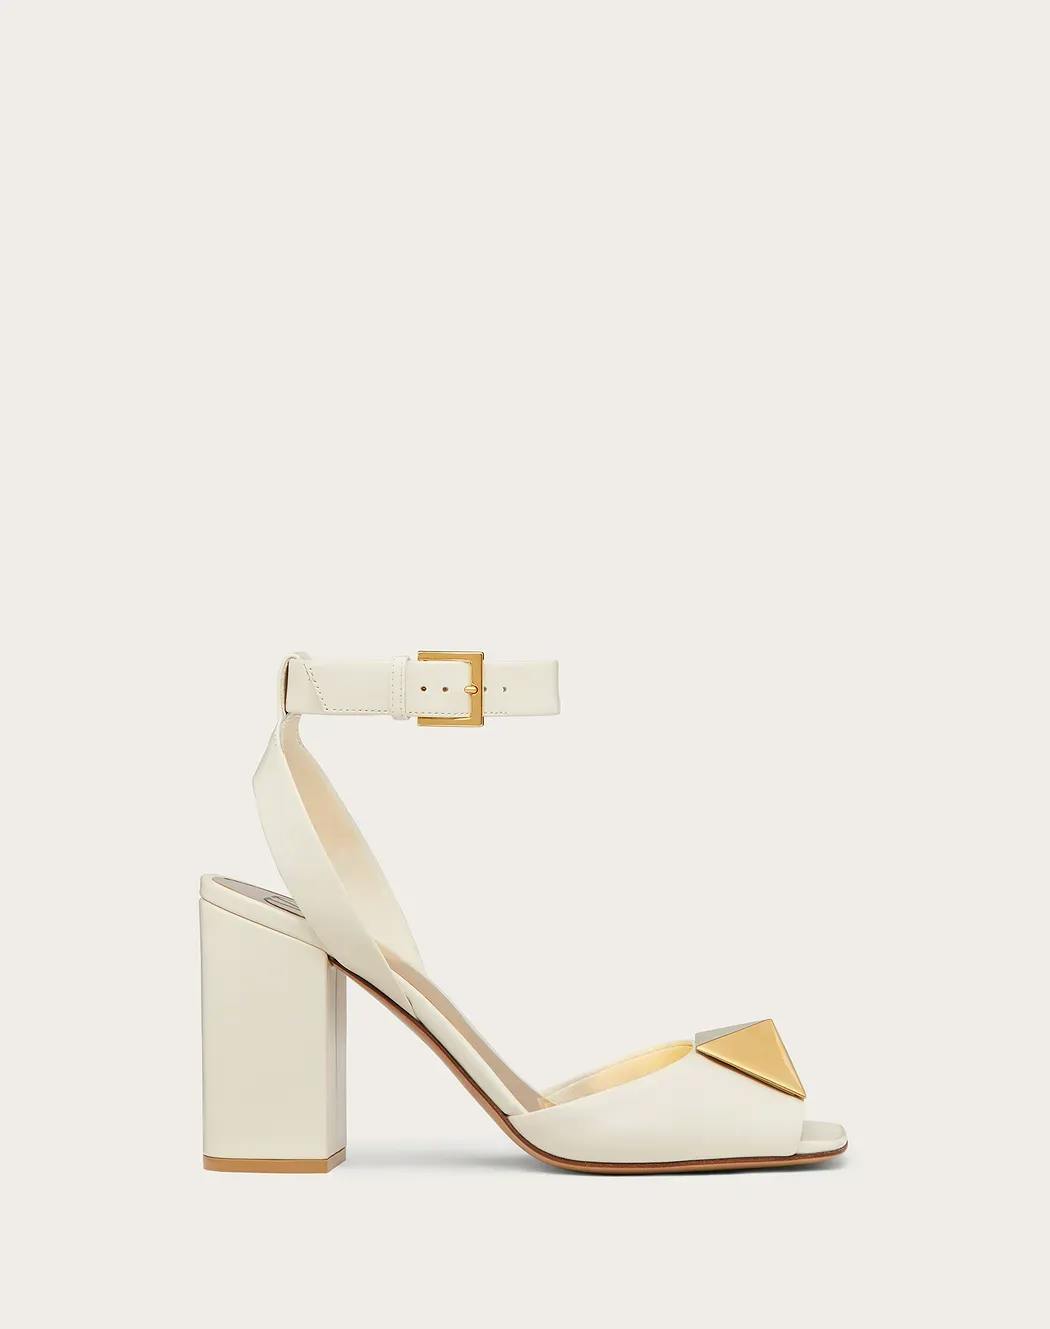 A white high-heeled sandal with a chunky heel, ankle strap with a gold buckle, and a gold triangular embellishment on the toe strap. The shoe has a minimalist and elegant design suitable for formal wear.